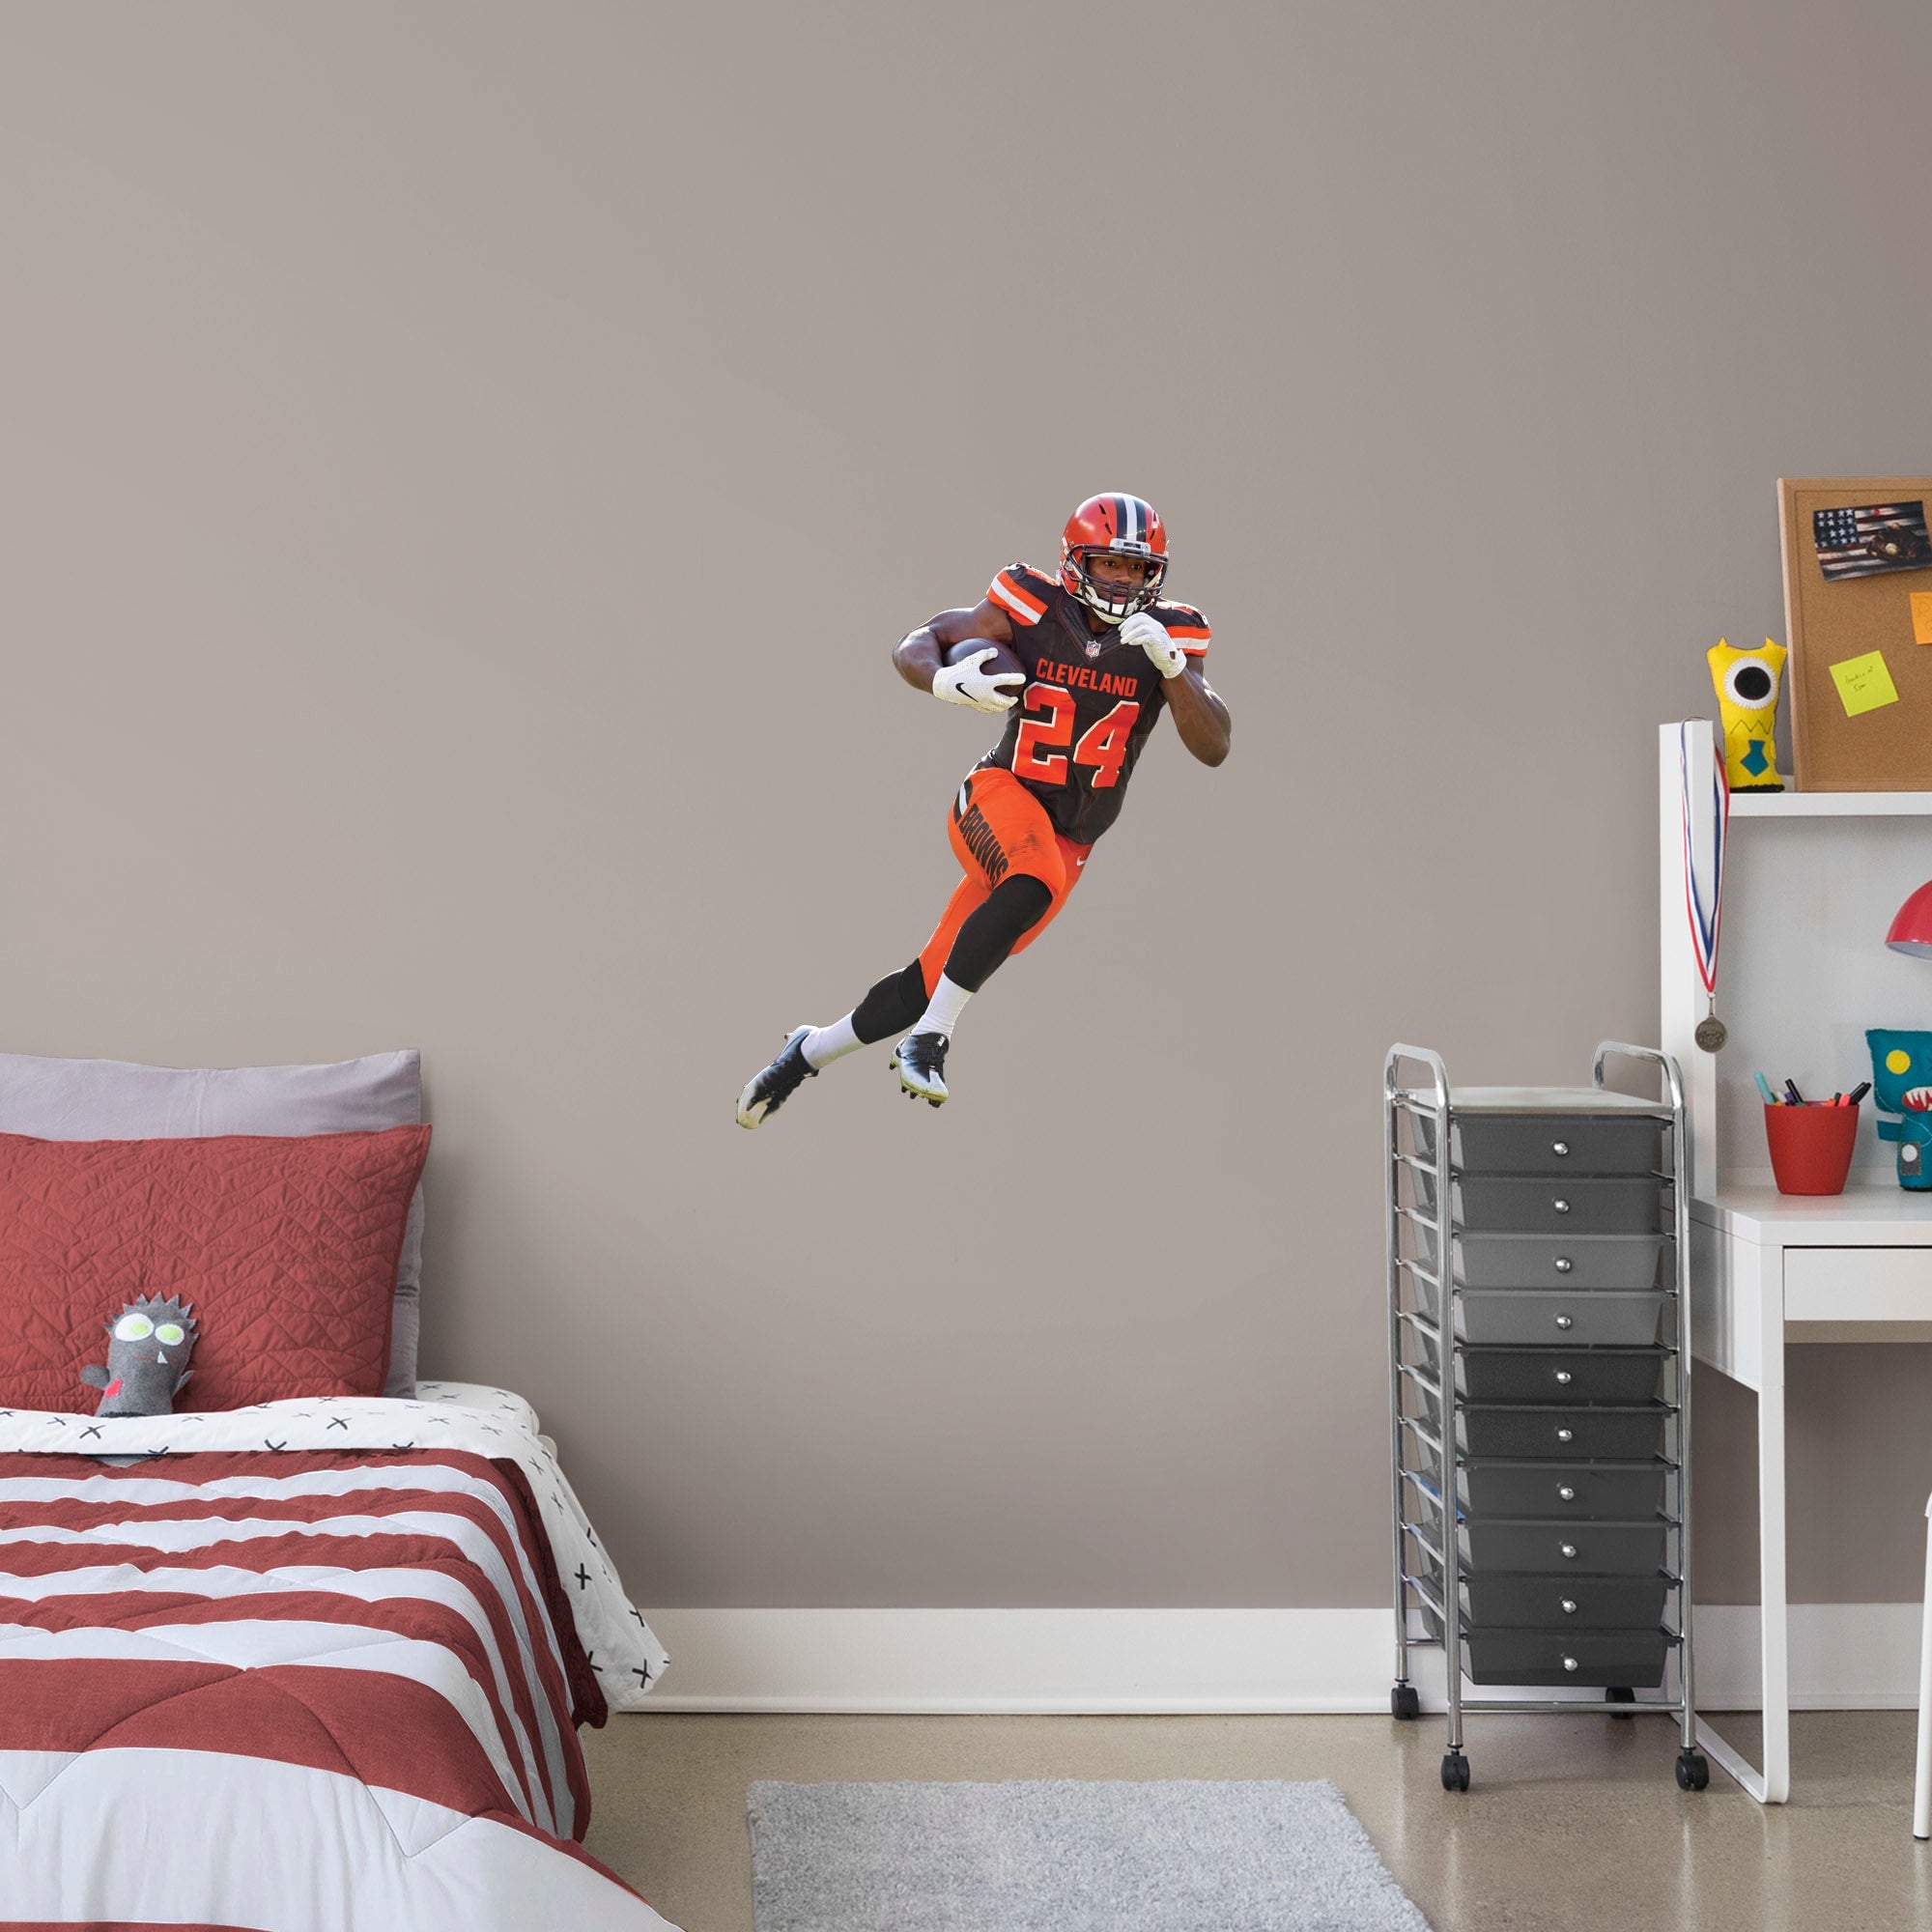 Nick Chubb for Cleveland Browns - Officially Licensed NFL Removable Wall Decal XL by Fathead | Vinyl